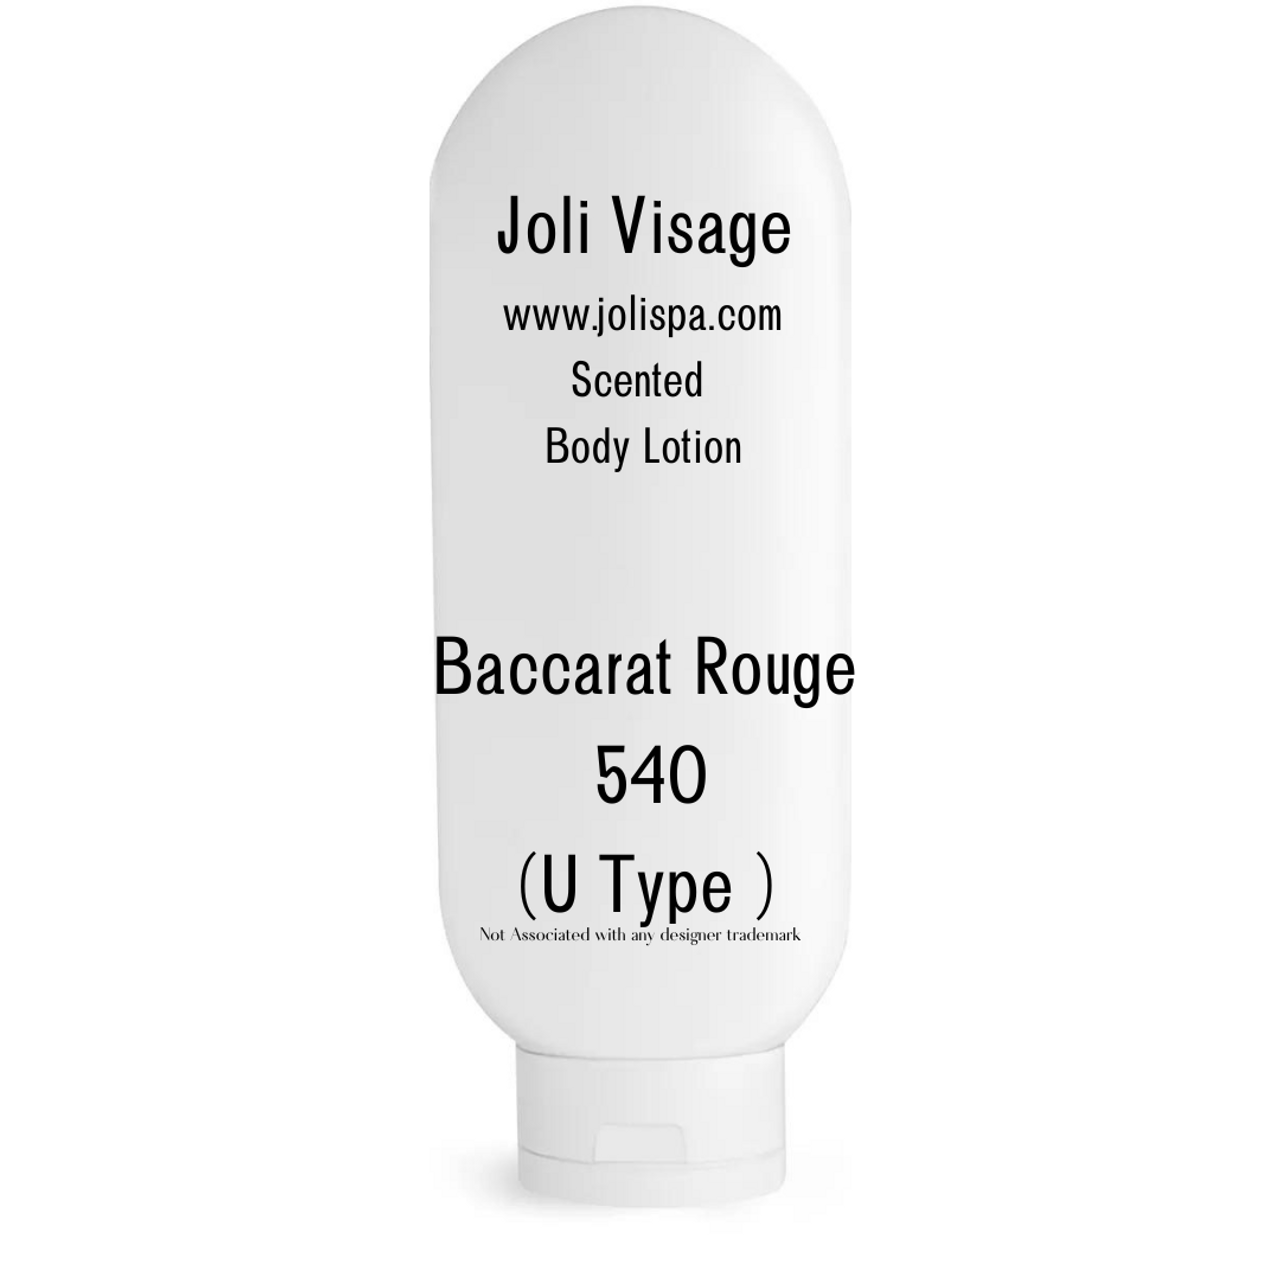 Baccarat Rouge 540 - body lotion